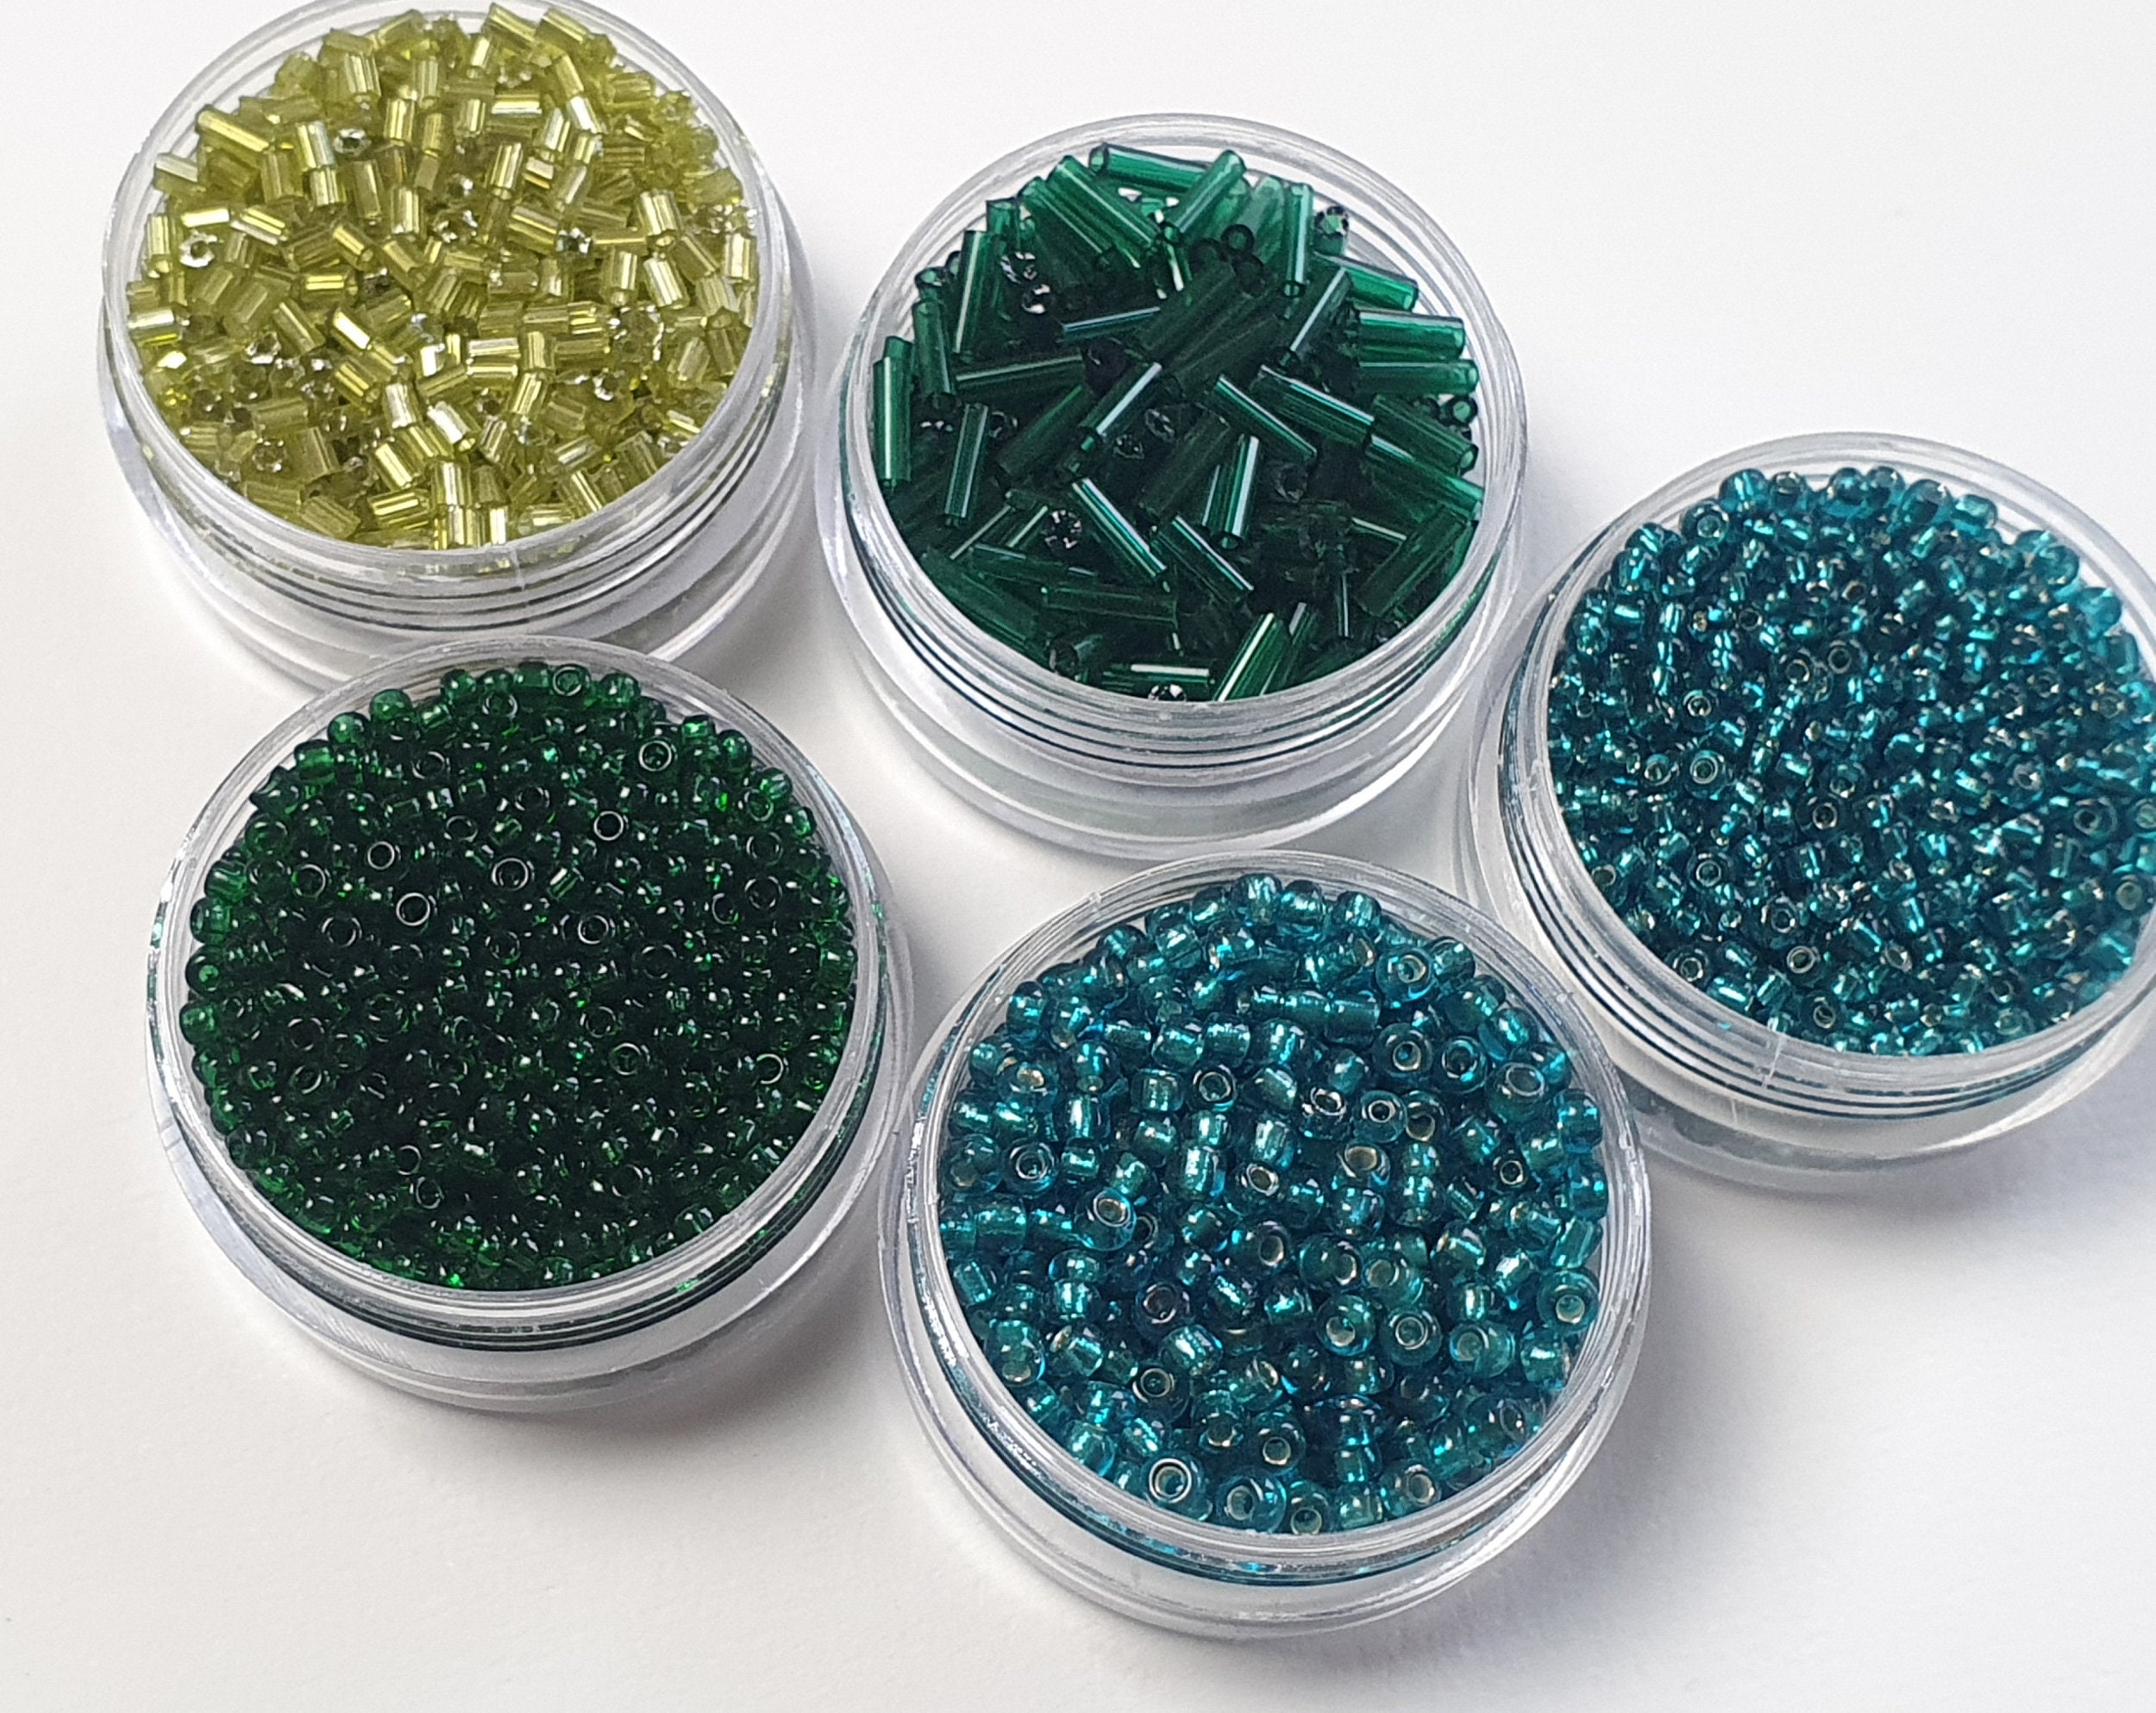 4mm Mix Seed Beads 40g , Blue Glass Seed Beads Mix Color Rocailles